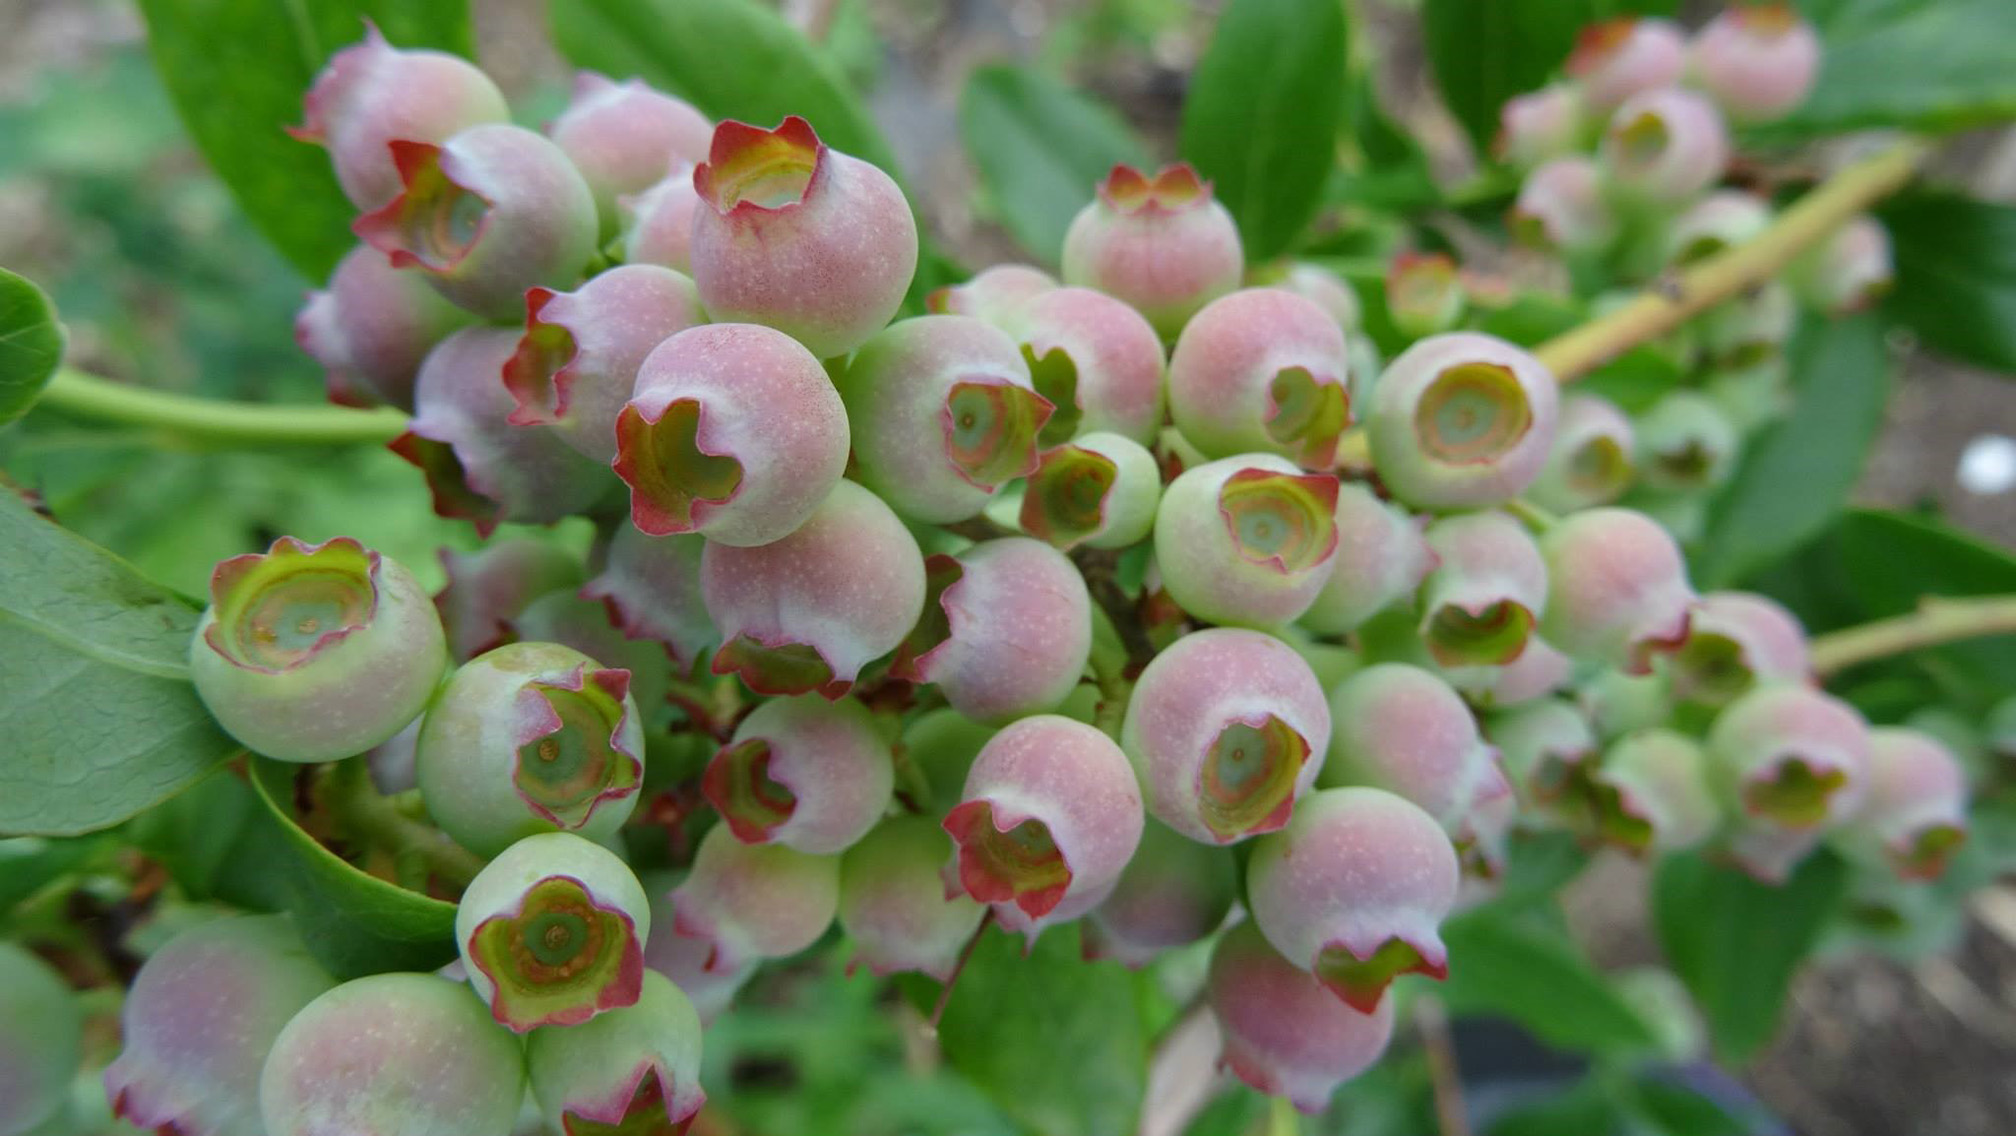 A group of several dozen blueberries still ripening on the bush. The berries are round and plump, but not yet ripe. They are green and pink, with a the remains of the flower showing as a wavy, dark red fringe on each berry.